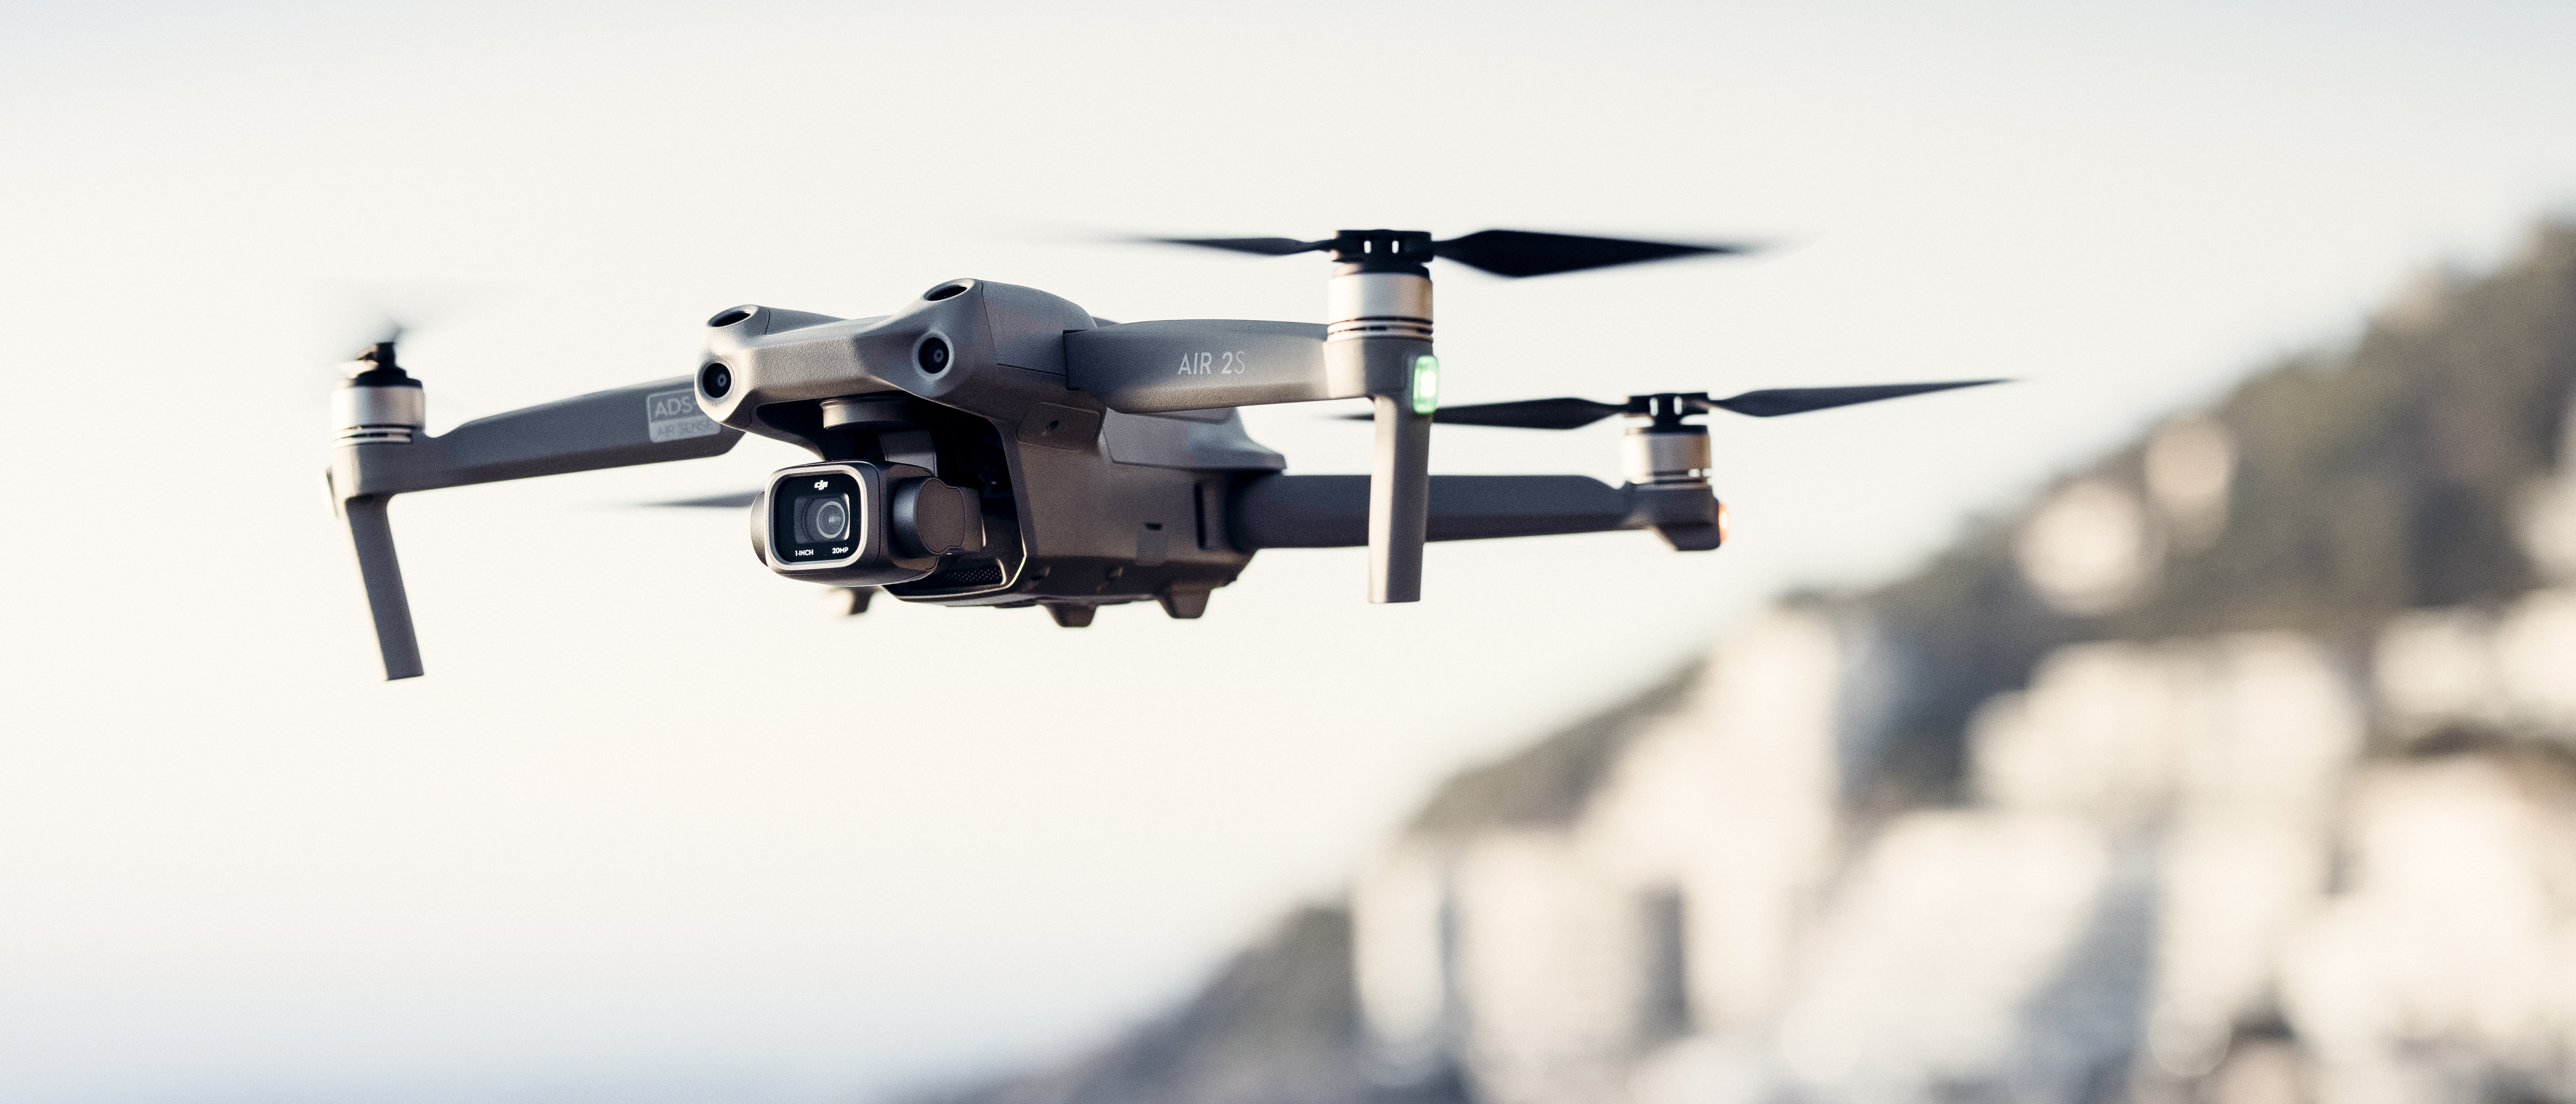 DJI Air 2S is the drone landscape photographers should buy - CNET